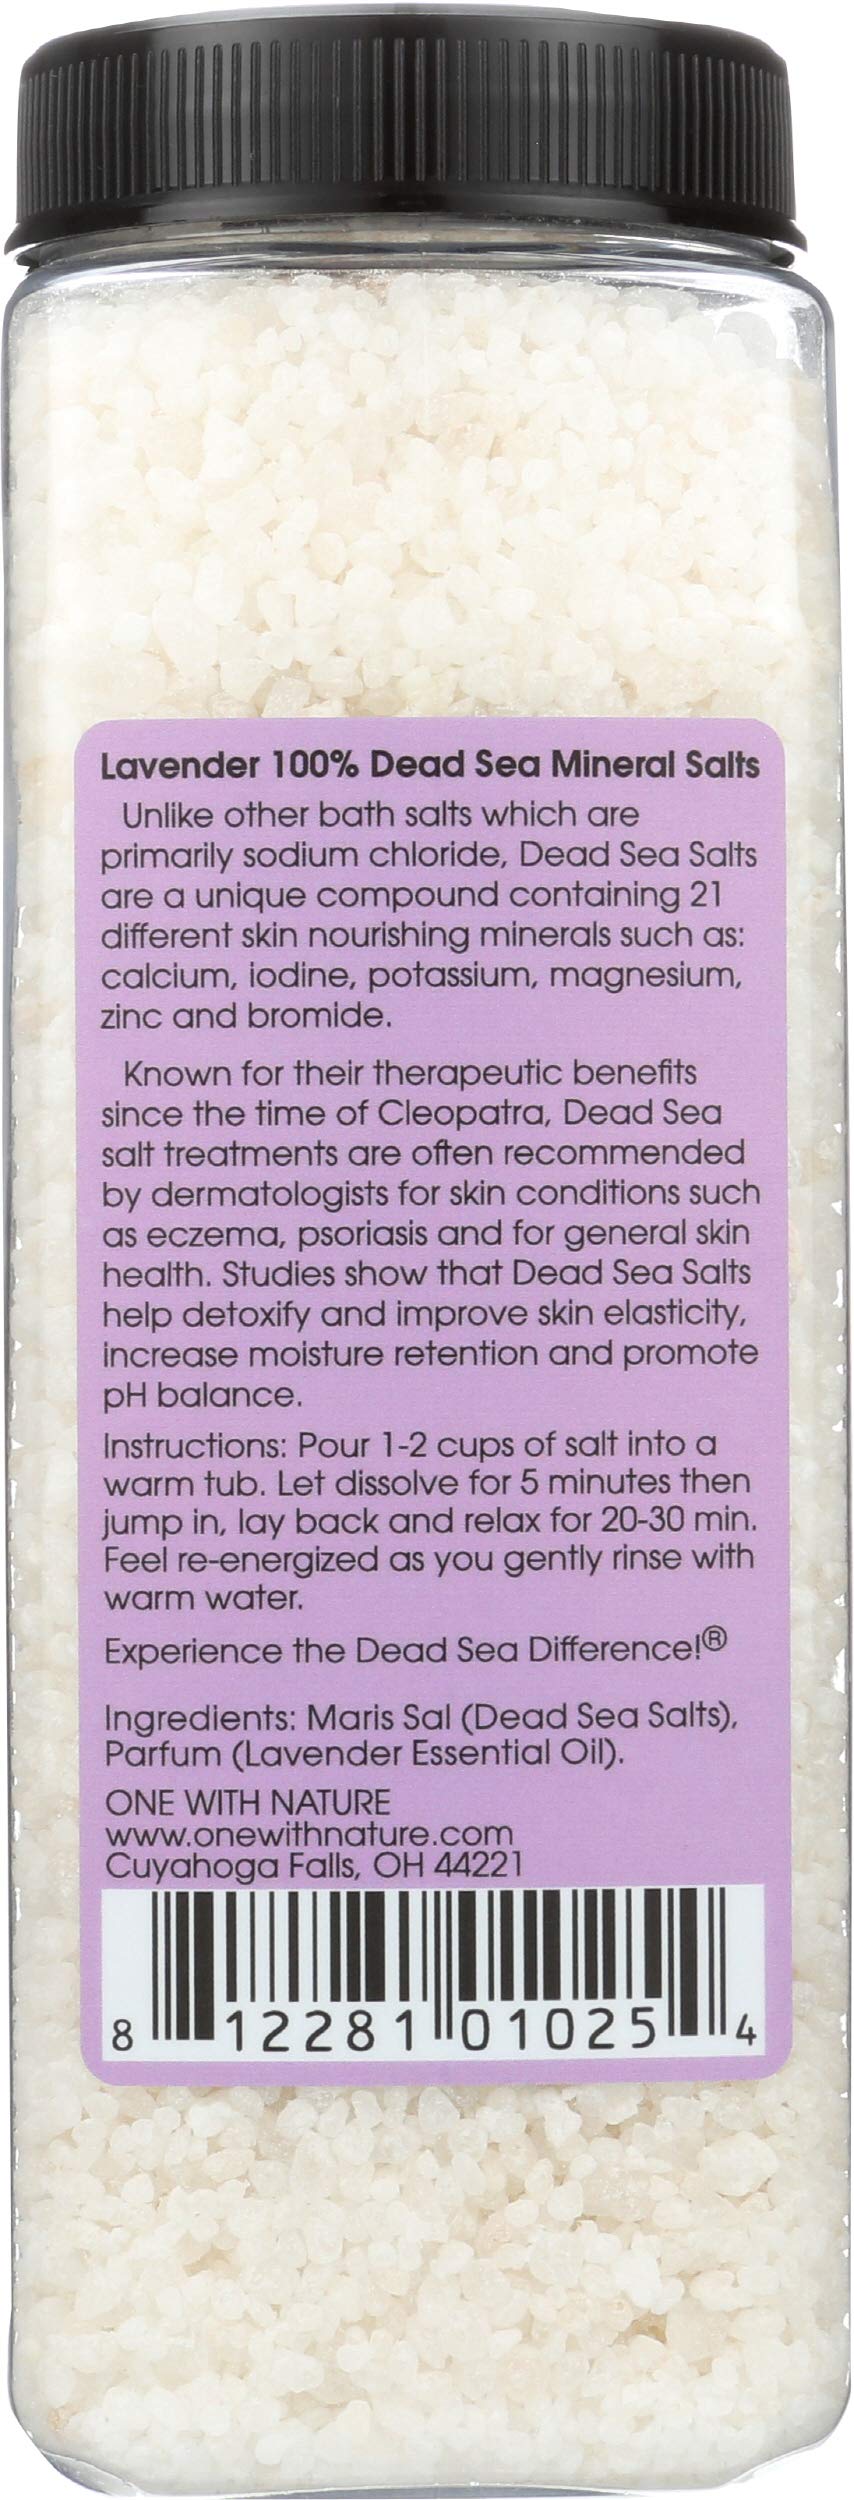 Dead Sea Mineral Salts, Lavender, 32 oz (907 g), One with Nature